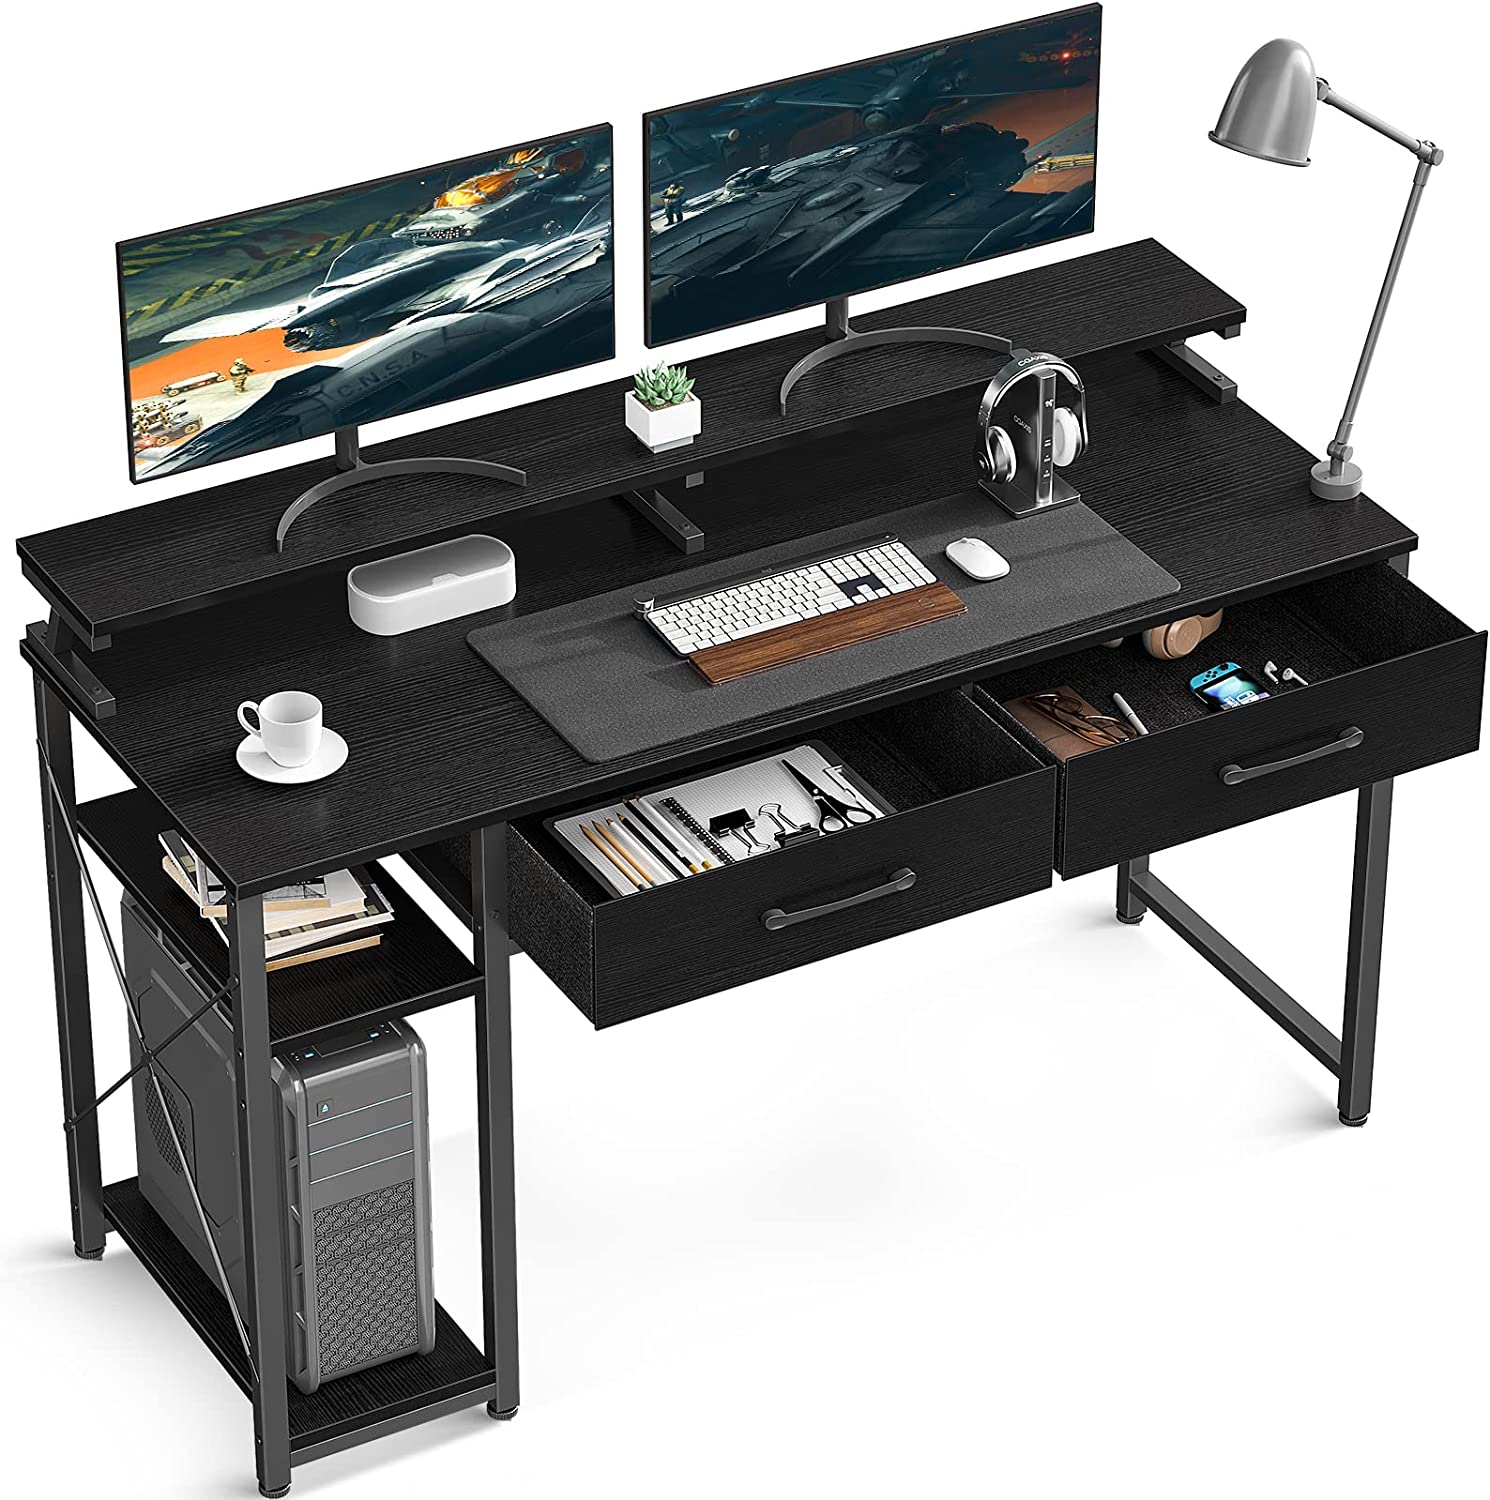 47 Inch Computer Desk with Drawers and Storage Shelves – ODK Home